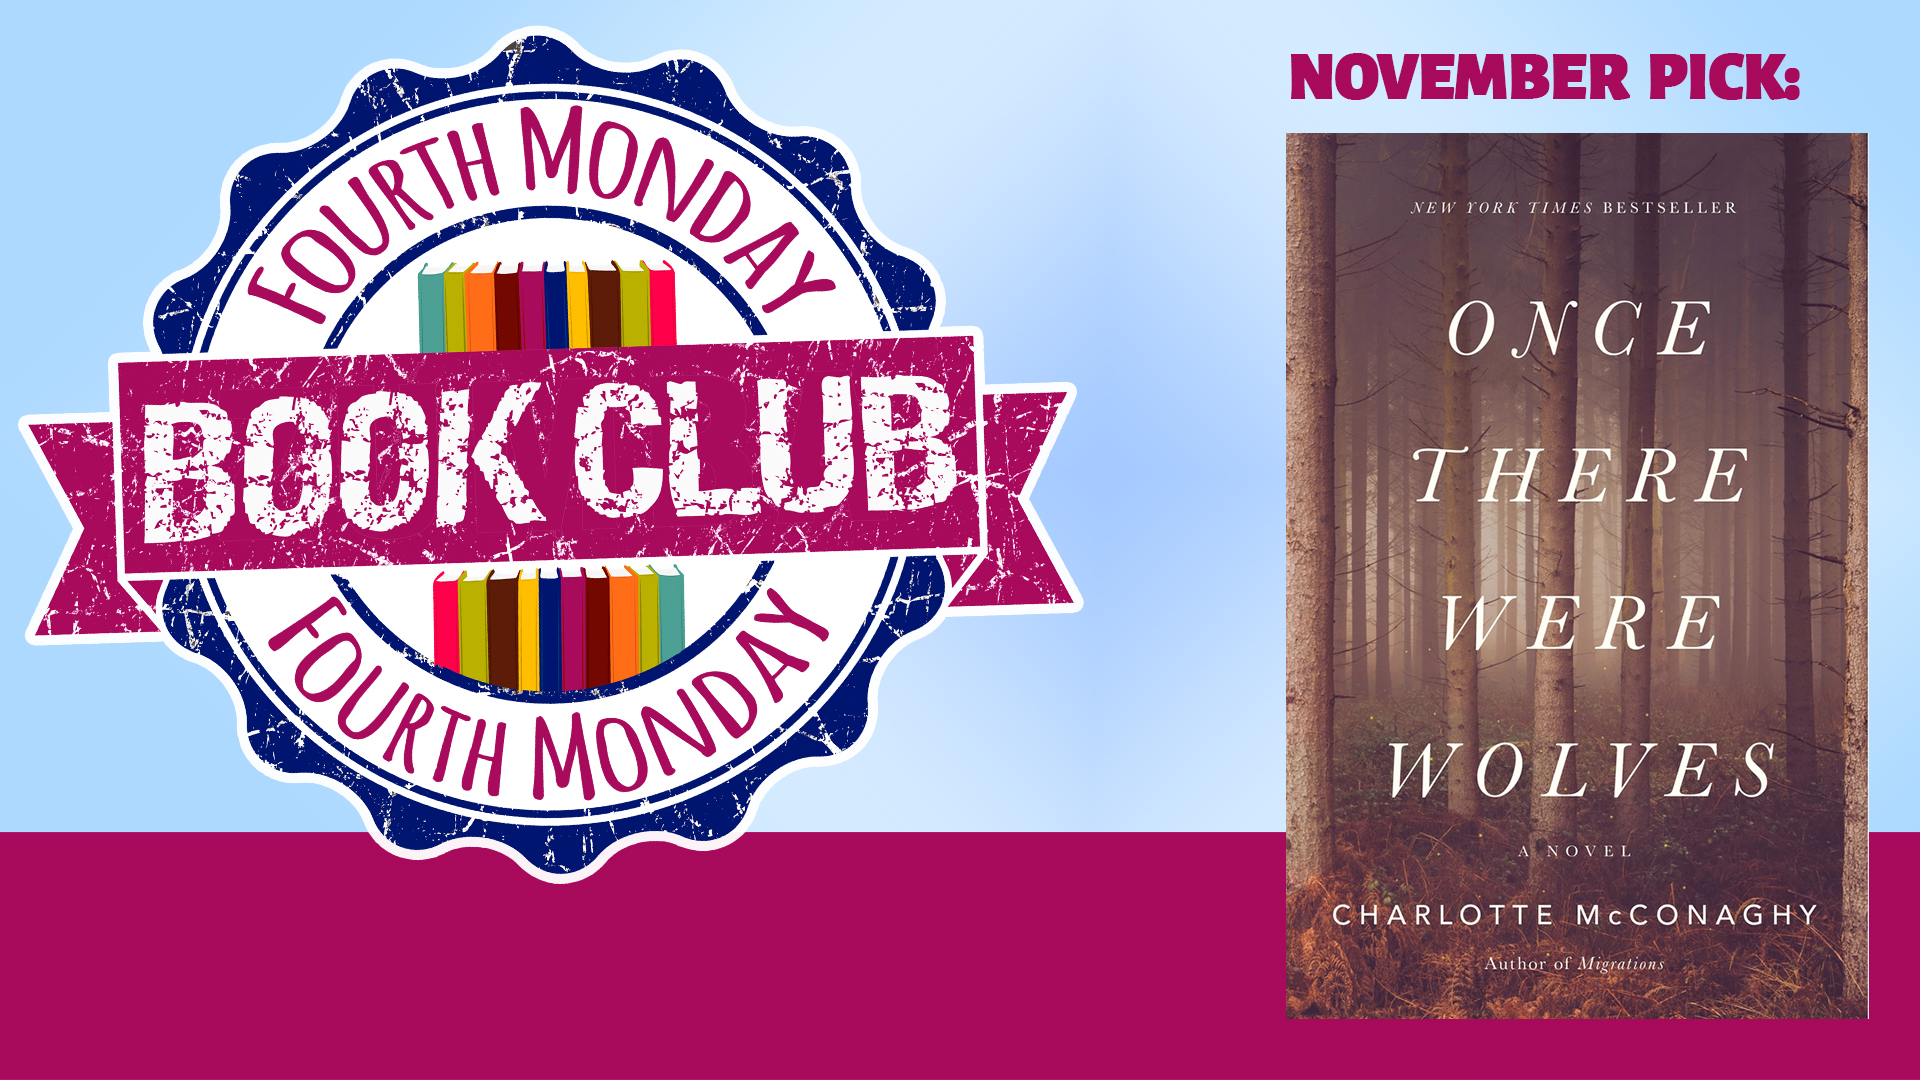 Image reads "Fourth Monday Book Club" on a blue background with a pink box running along the bottom of the image. The book cover for "Once There Were Wolves" by Charlotte McConaghy takes up the right size of the image.